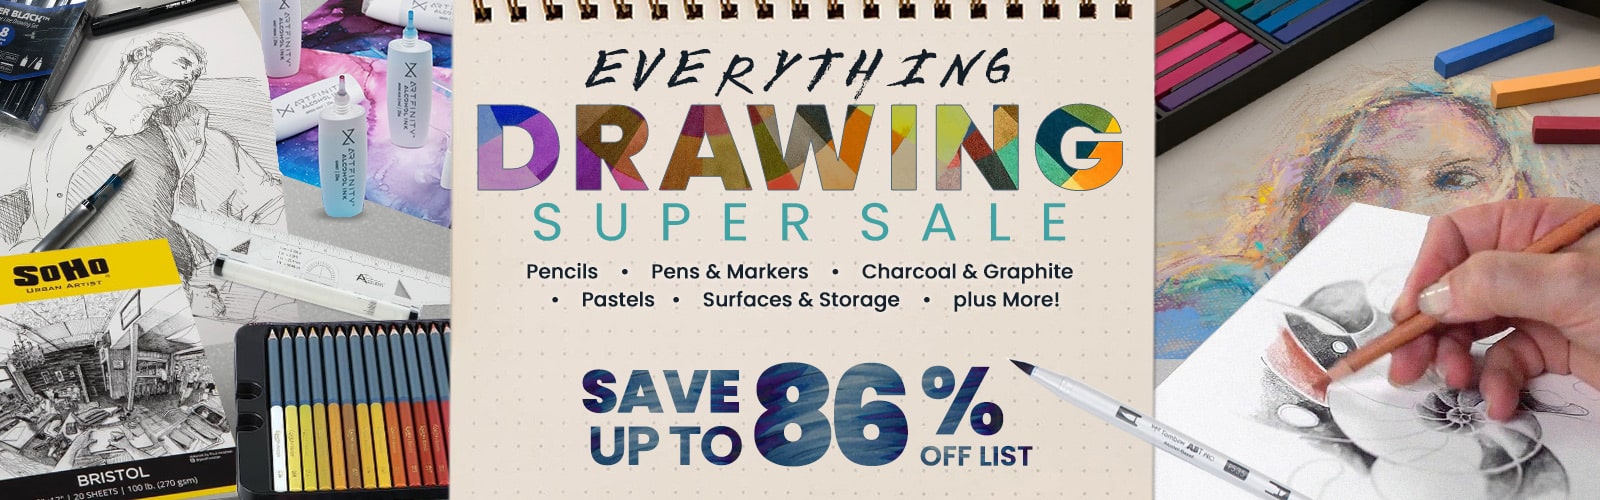 Everything DRAWING Super Sale - Up to 86% Off List Price